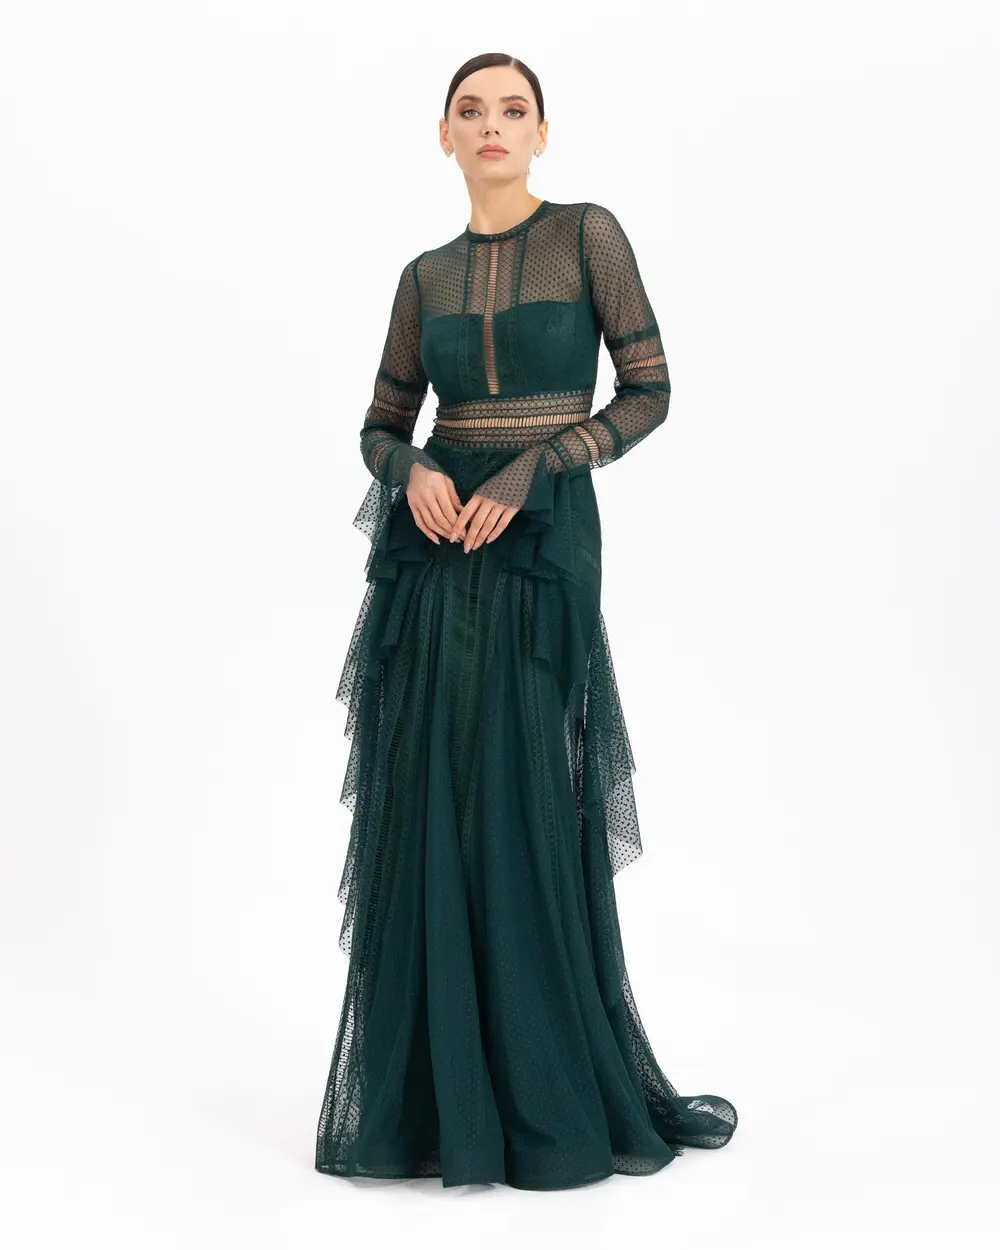 FISH FORM MAXI SIZE TULLE EVENING DRESS